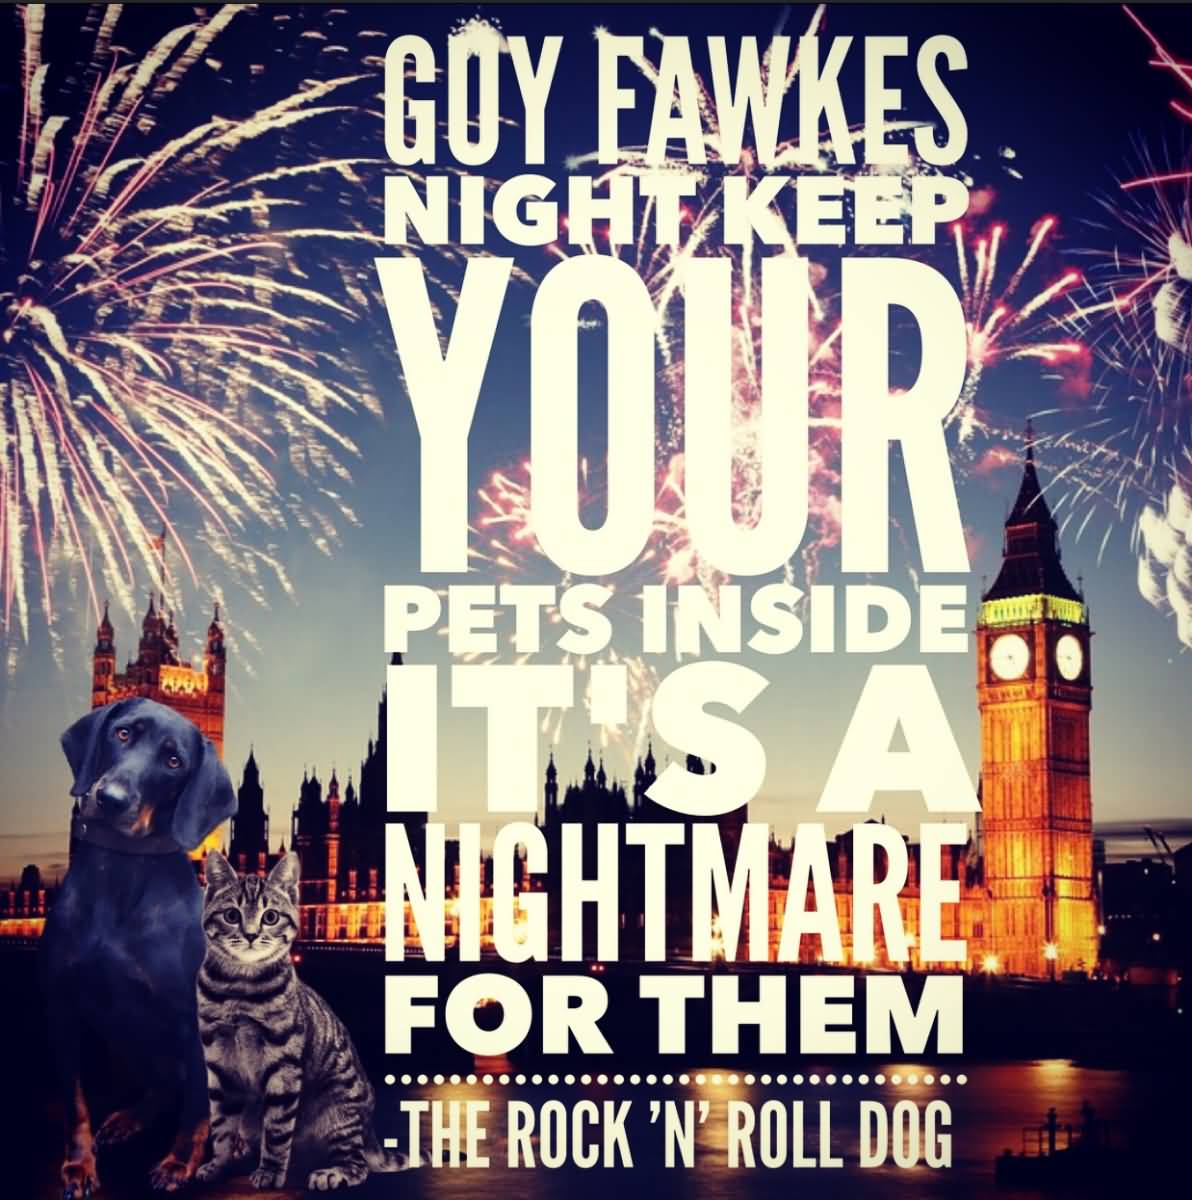 Guy Fawkes Night Keep Your Pets Inside It's A Nightmare For Them